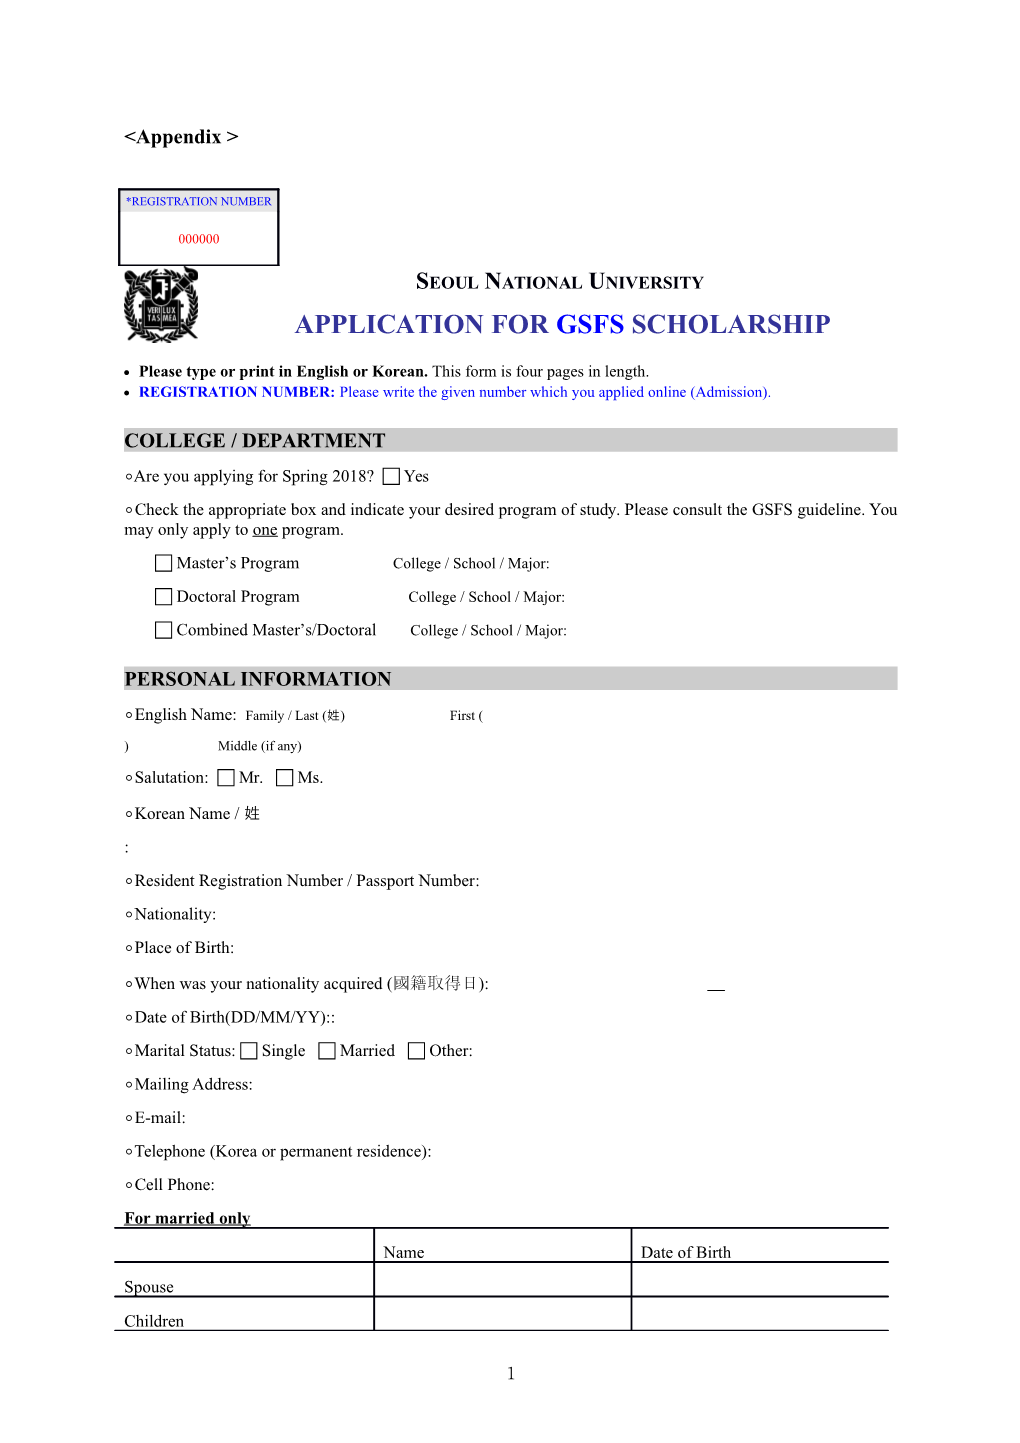 Application for GSFS Scholarship